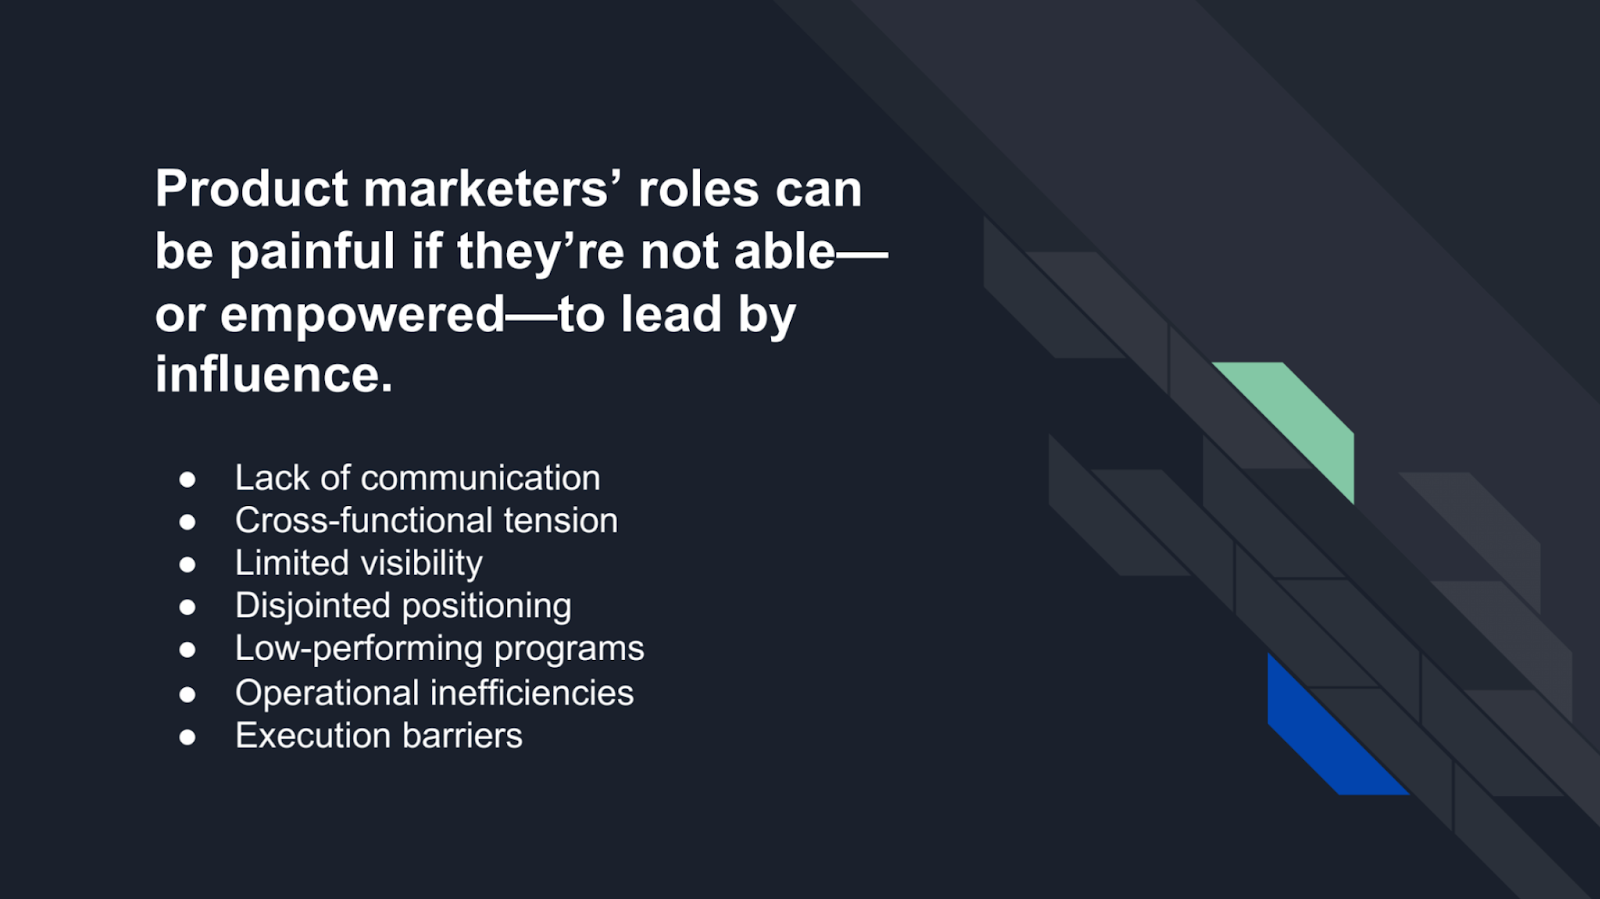 Product marketers' roles can be painful if they're not able - or empowered - to lead by influence.